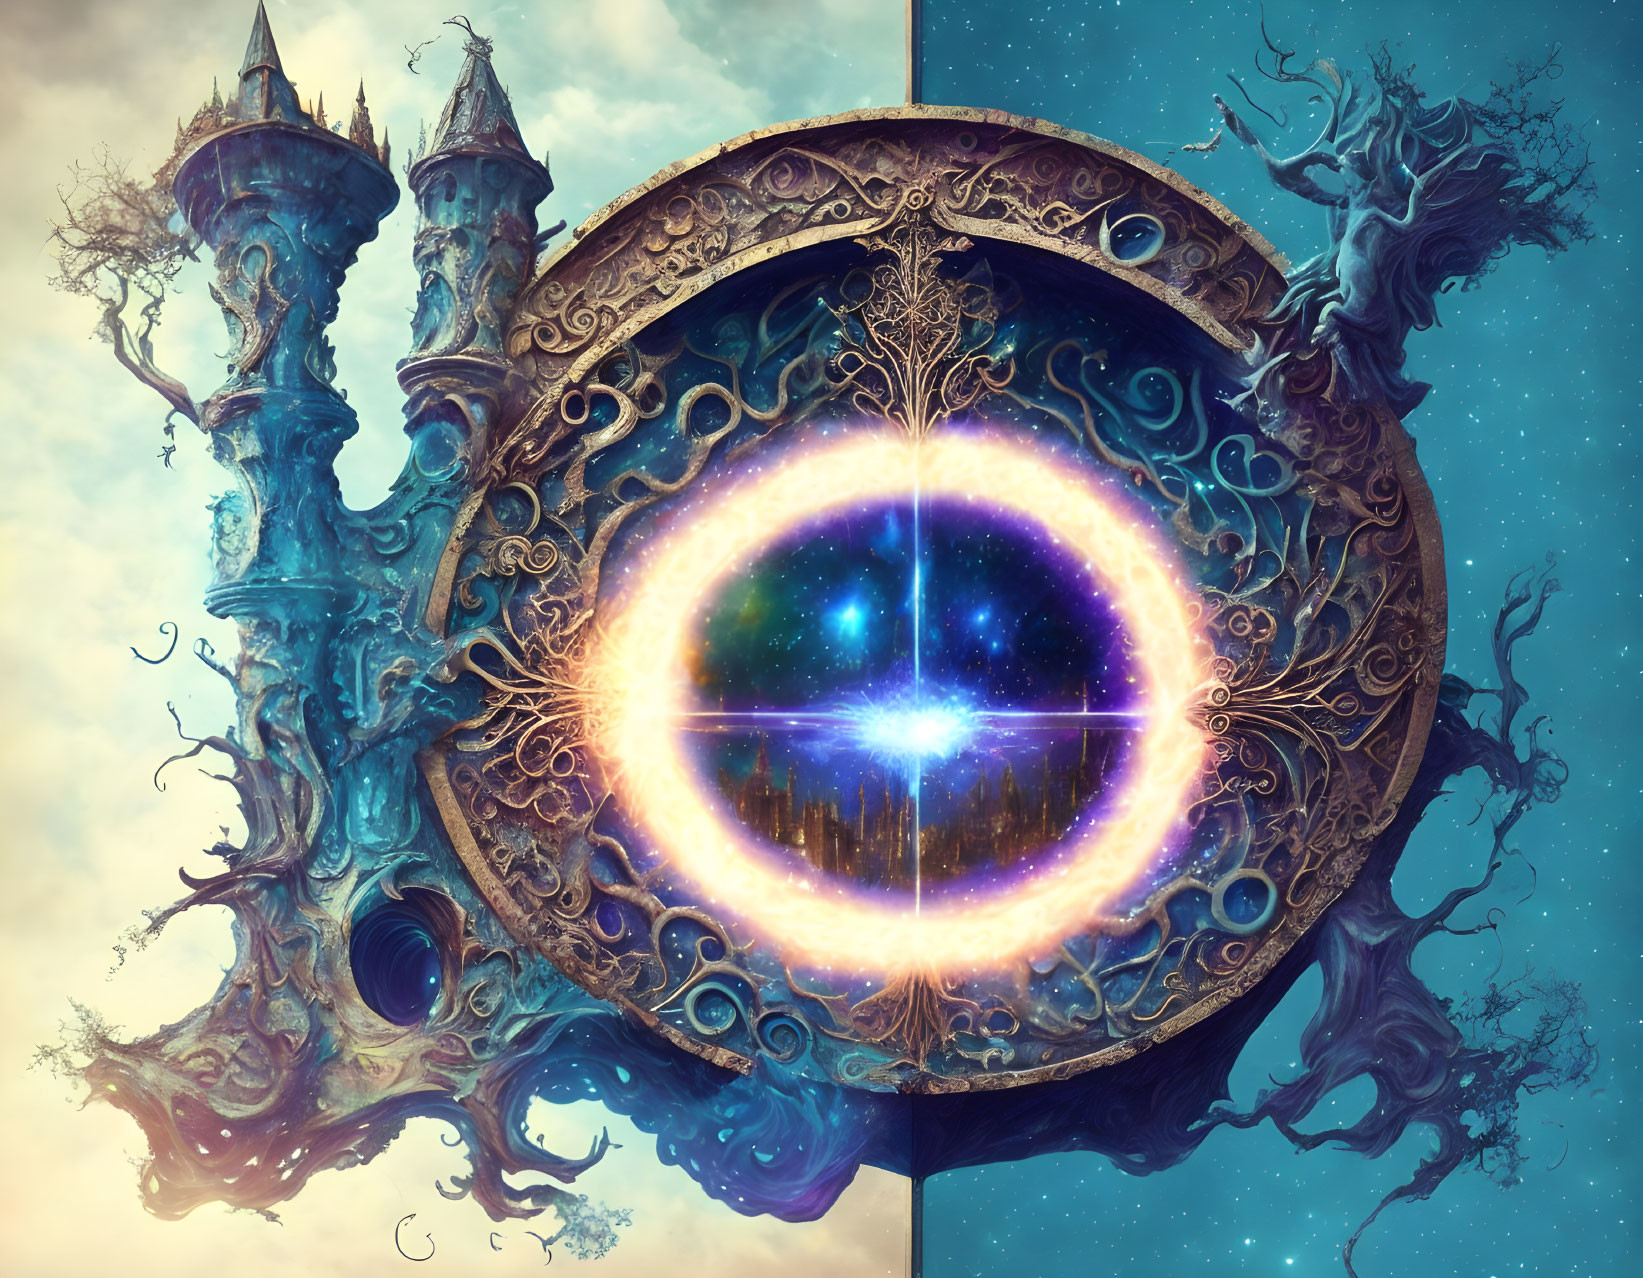 Fantastical circular portal with cosmic energy, blue towers, and tree-like structures